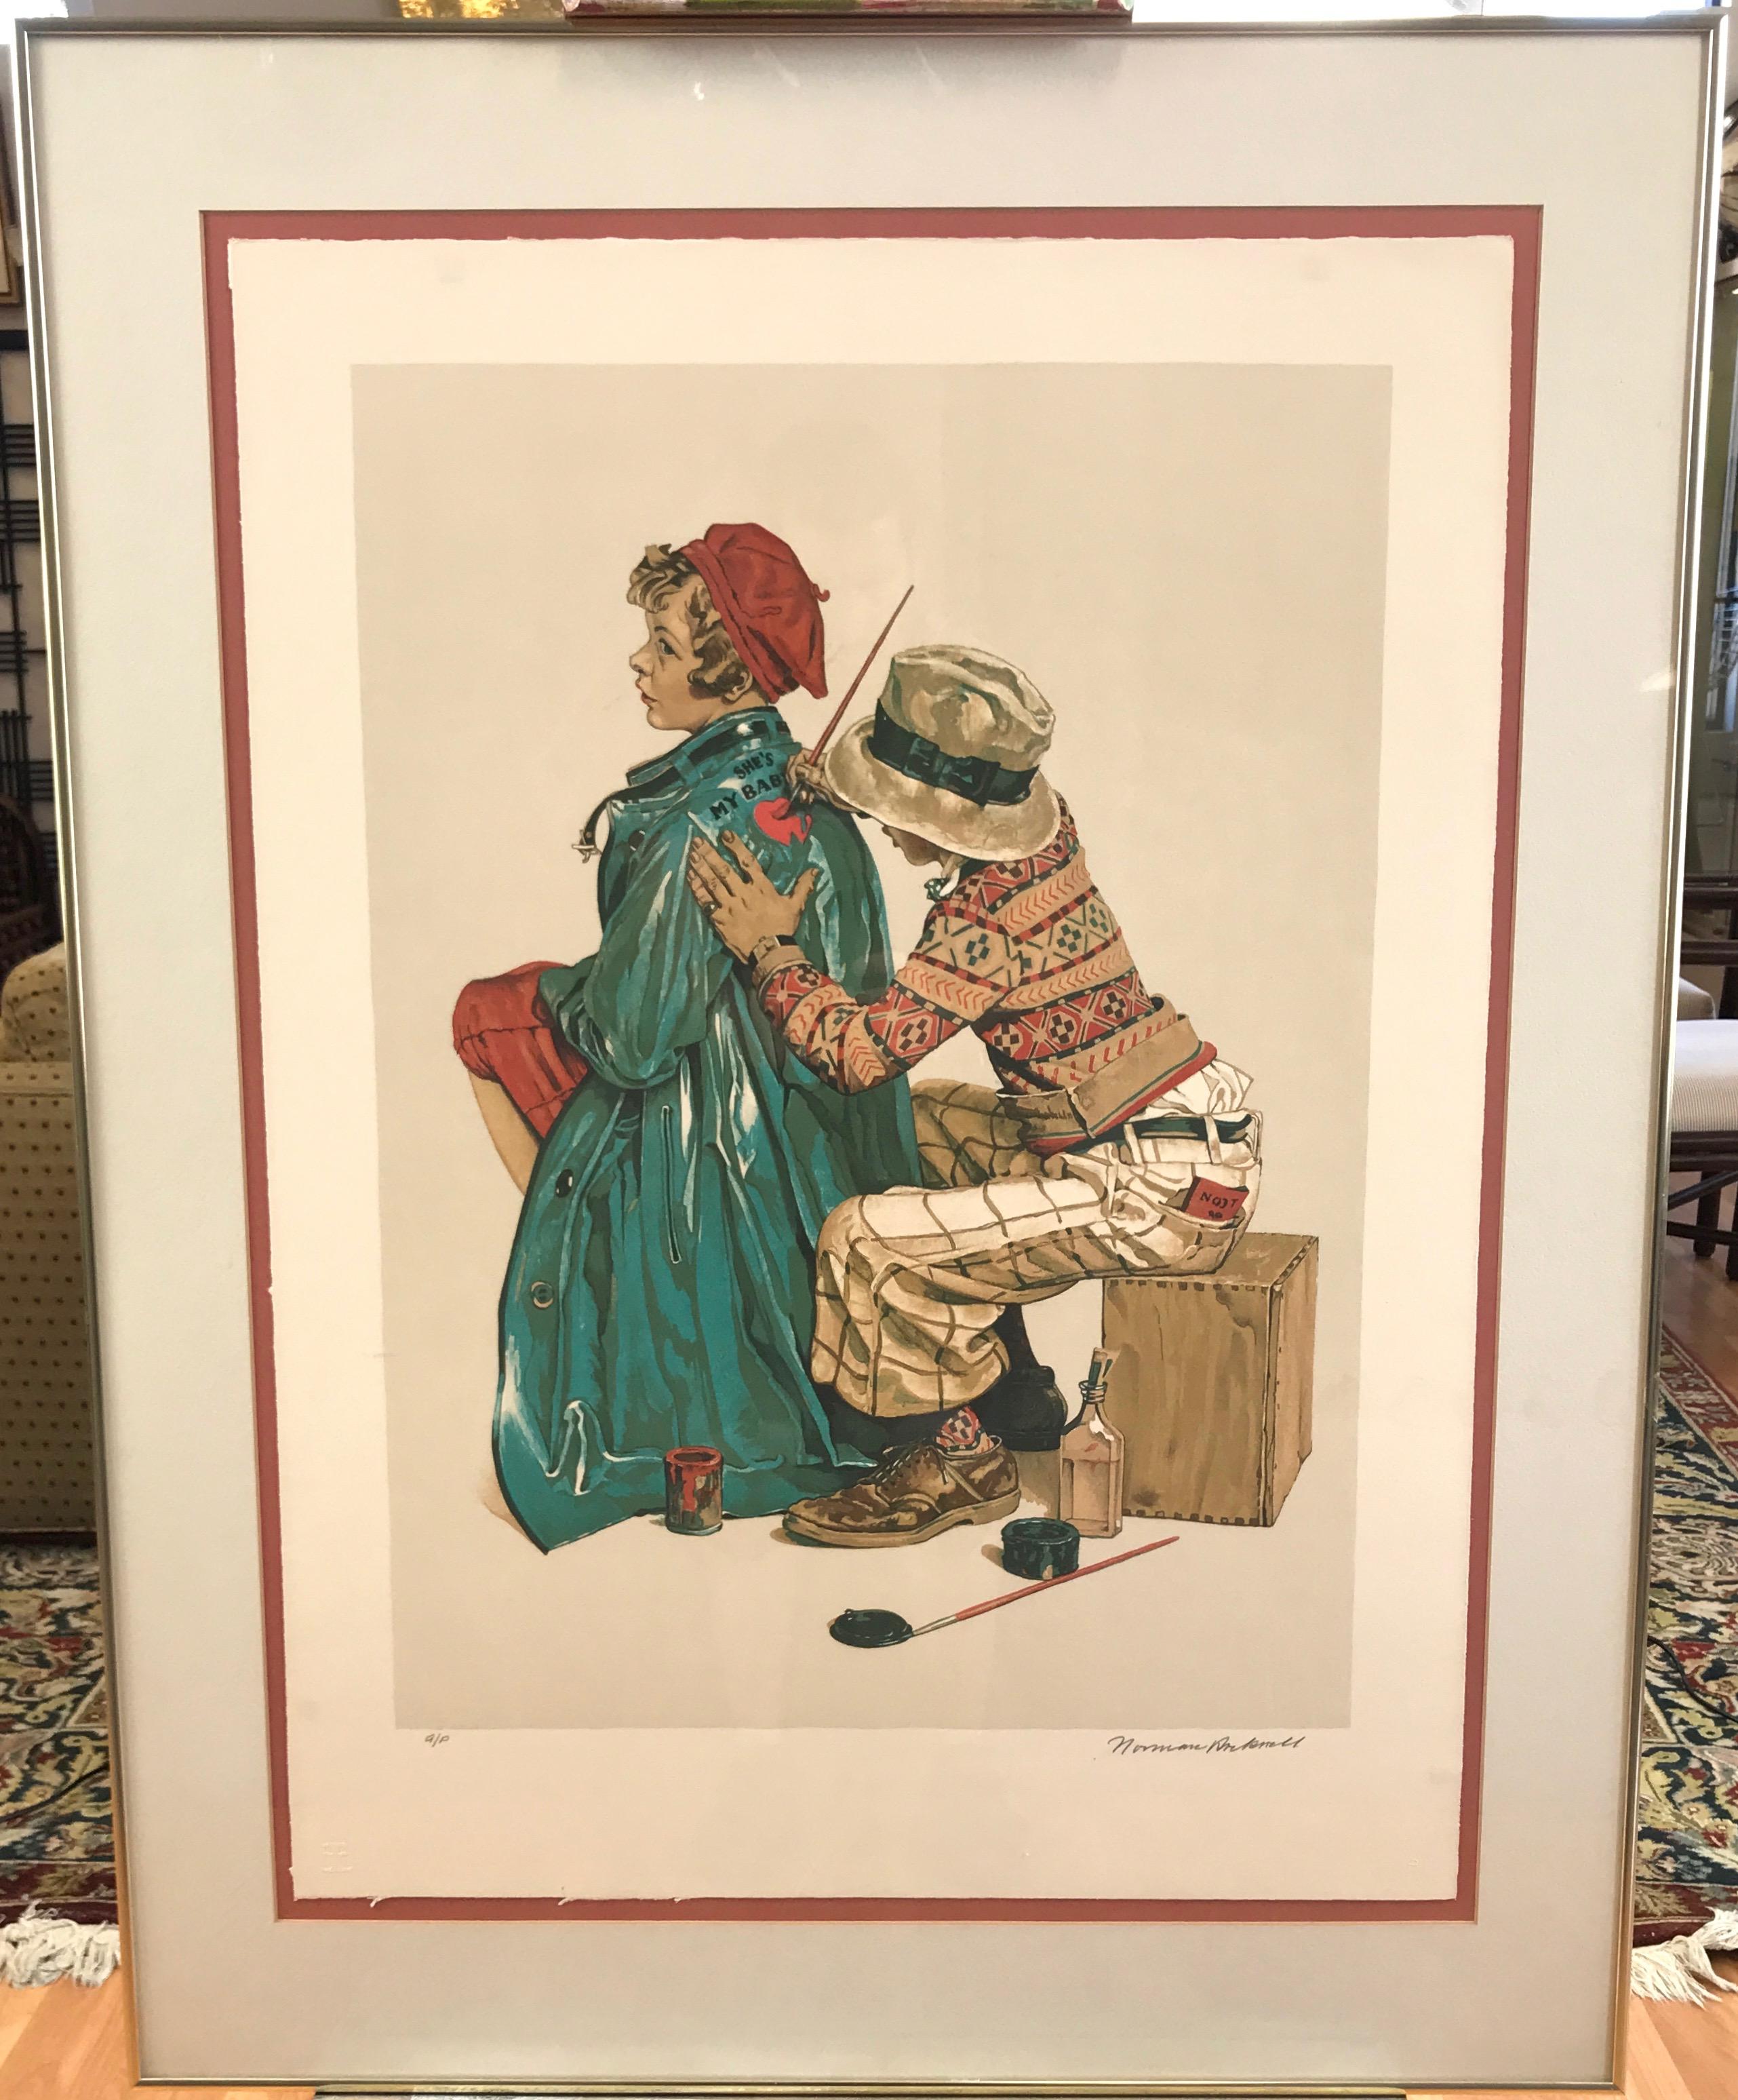 A large hand signed and numbered artist’s proof lithograph of “The Young Artist” by Norman Rockwell in original custom frame.

Original oil painting was created for The Saturday Evening Post’s June 4, 1927, cover. Rockwell (b. 1894–1978) had a 47